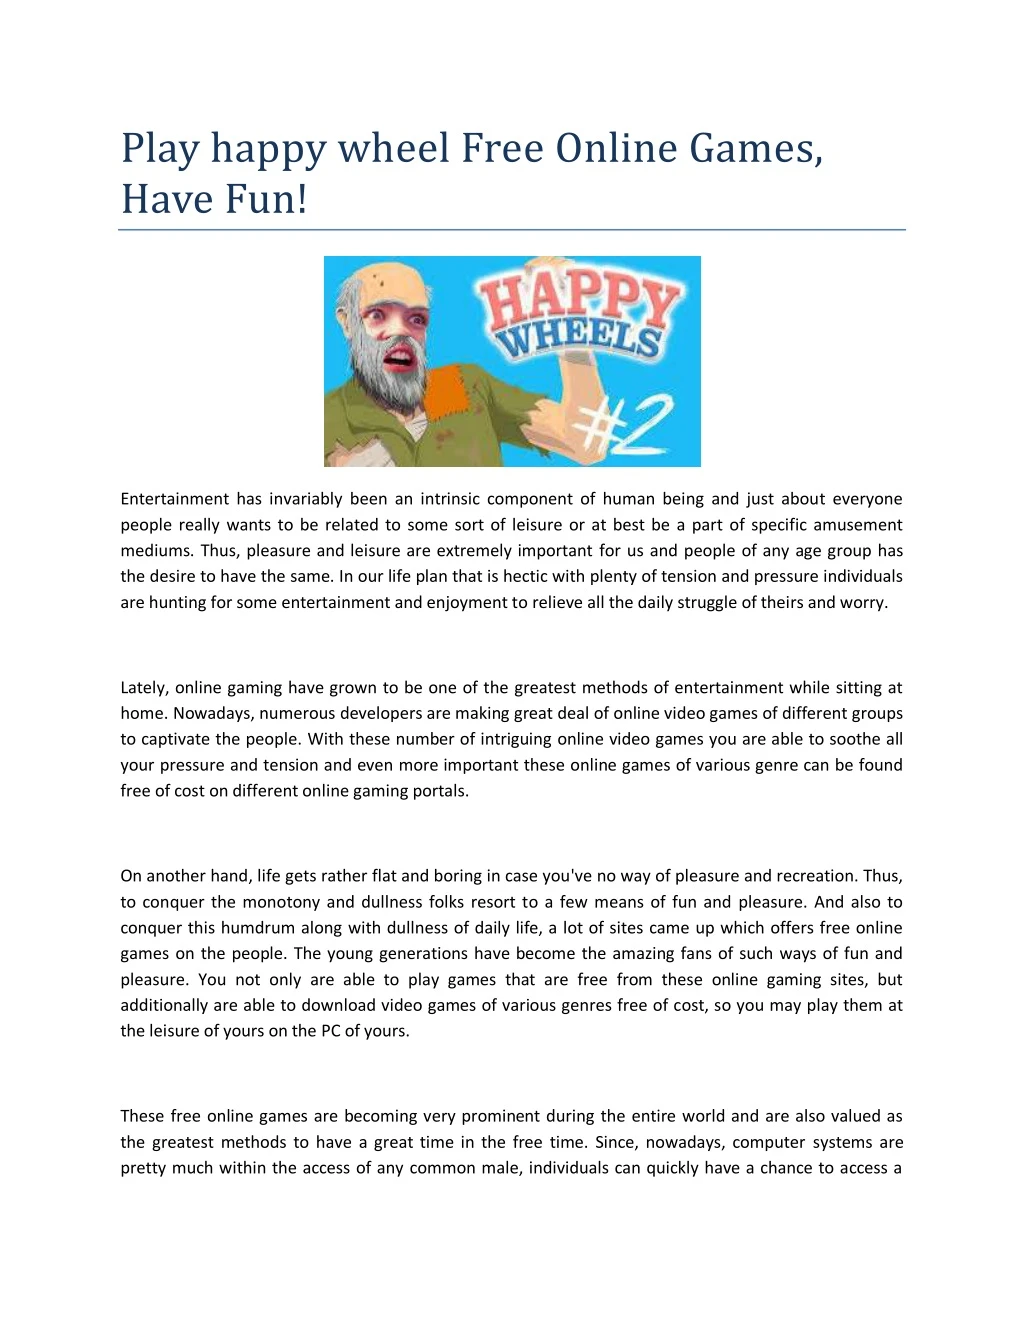 play happy wheel free online games have fun